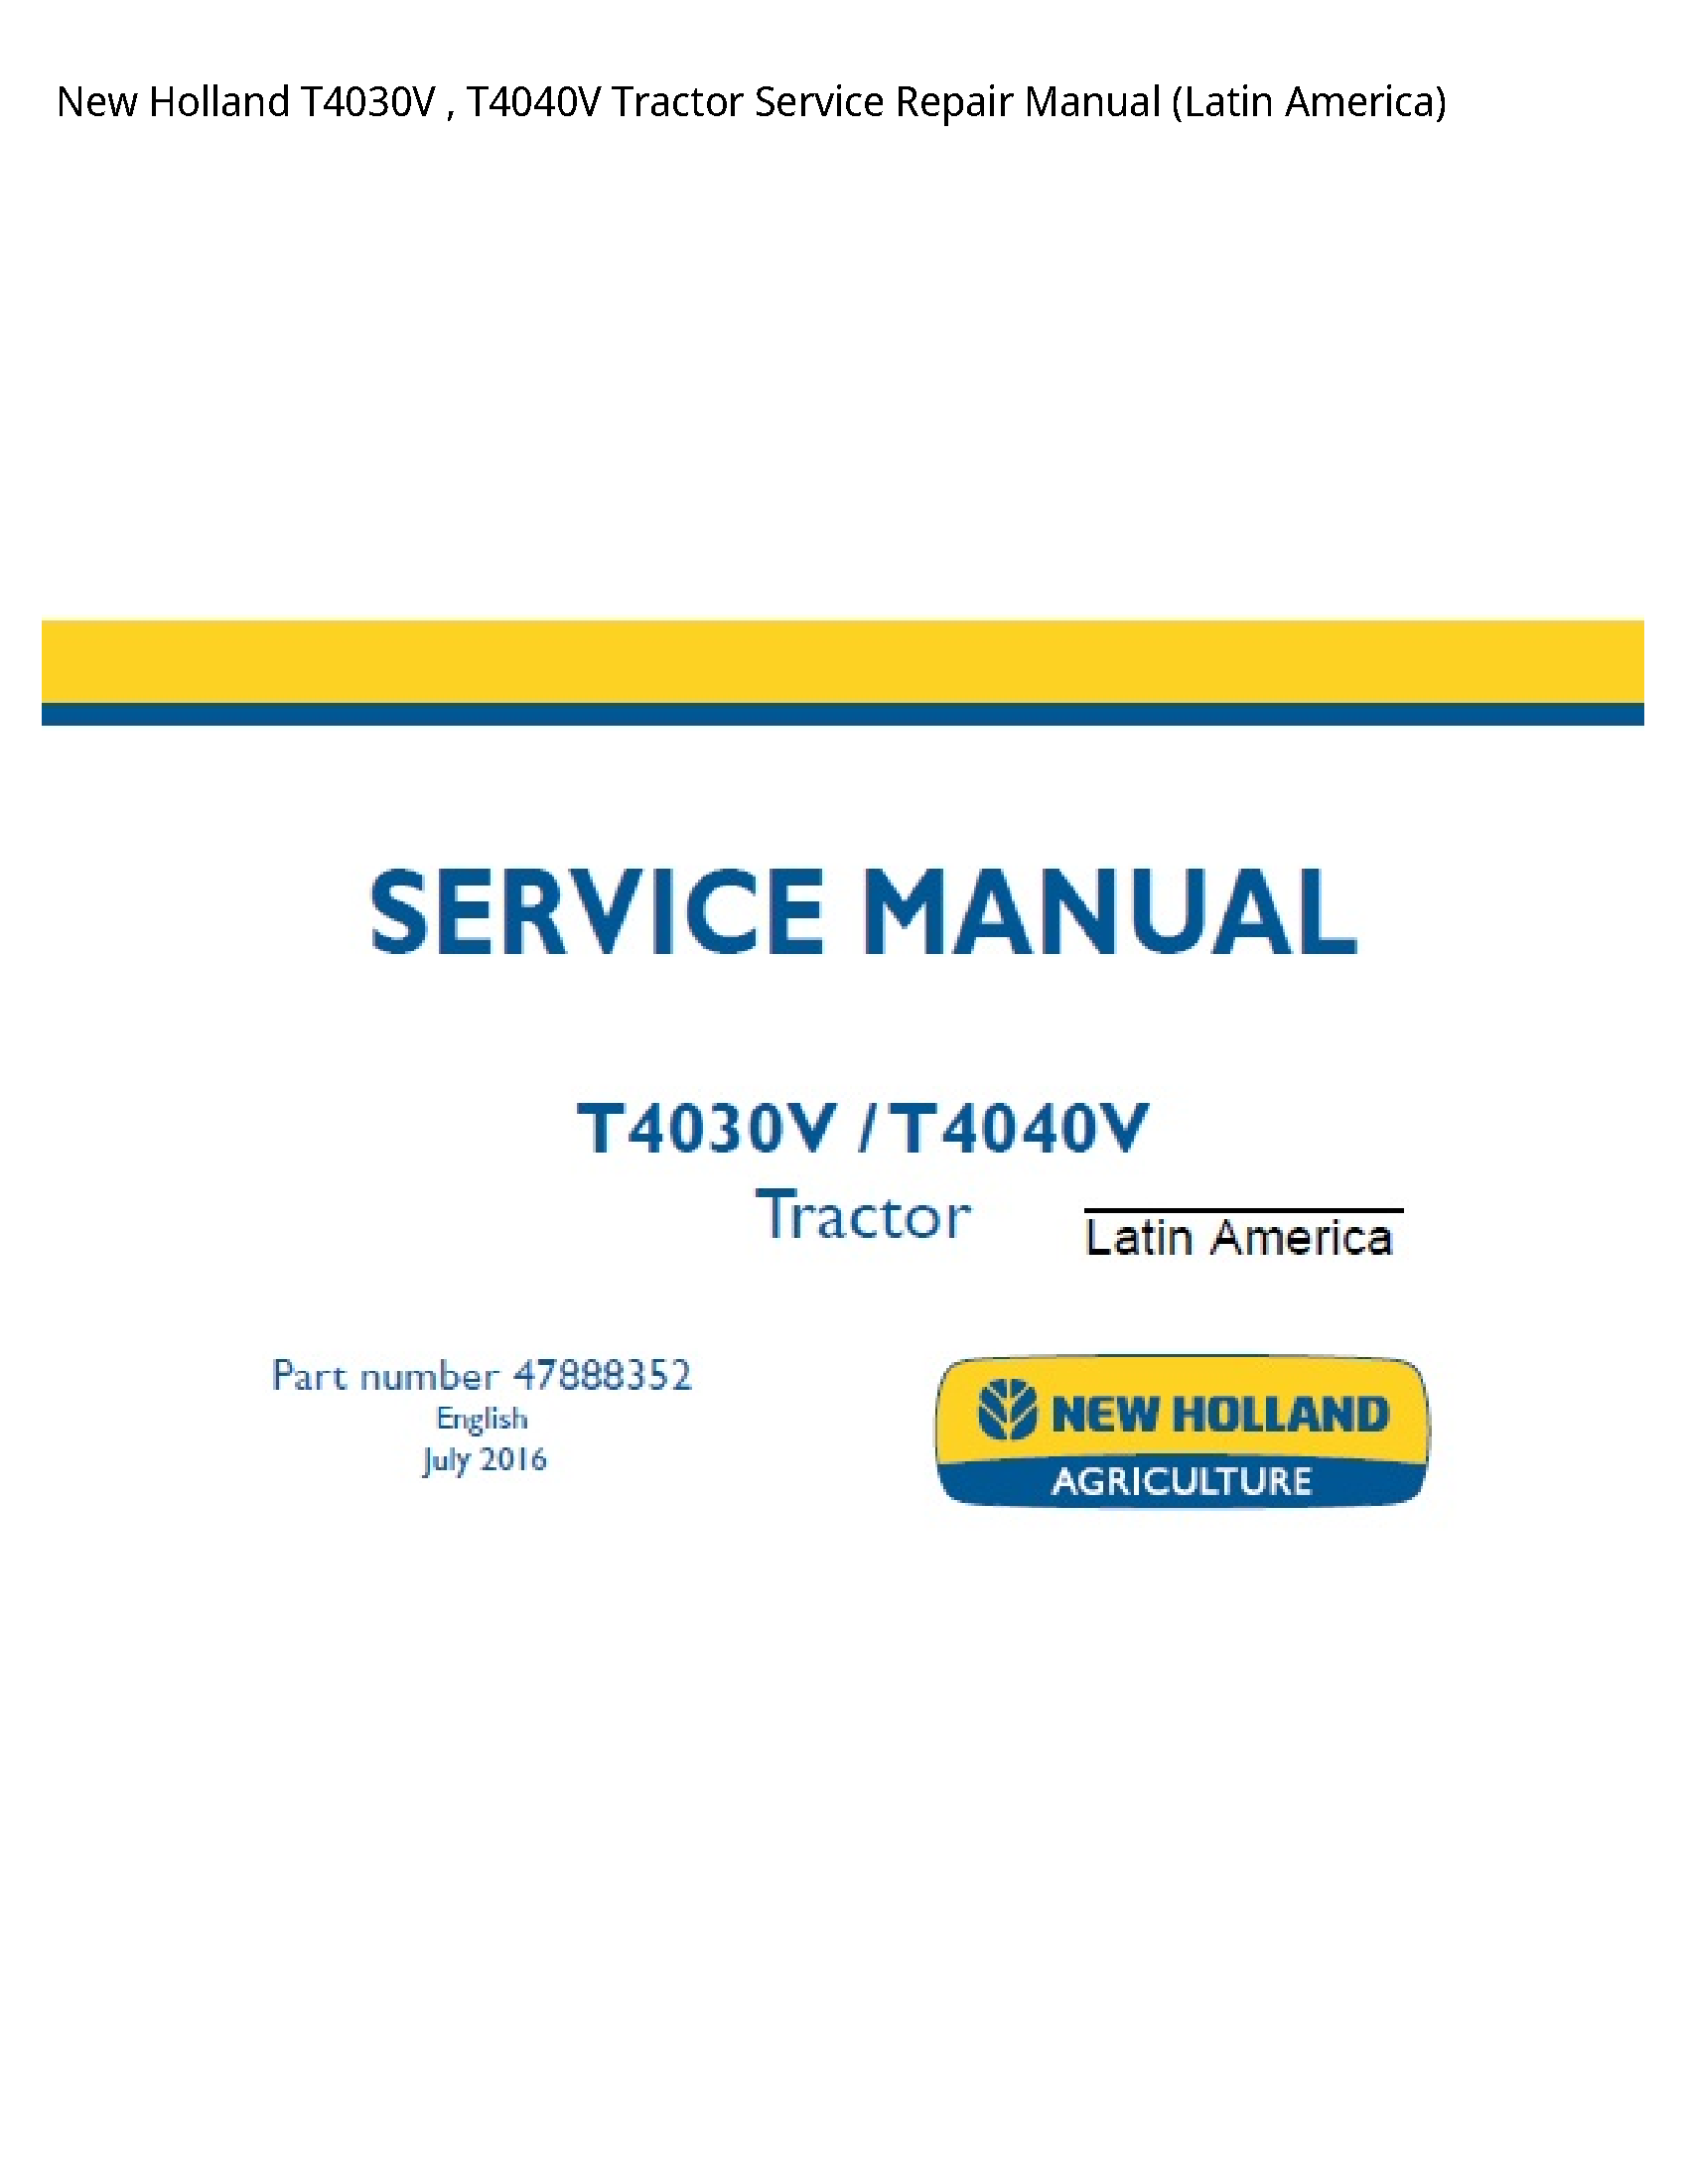 New Holland T4030V Tractor manual